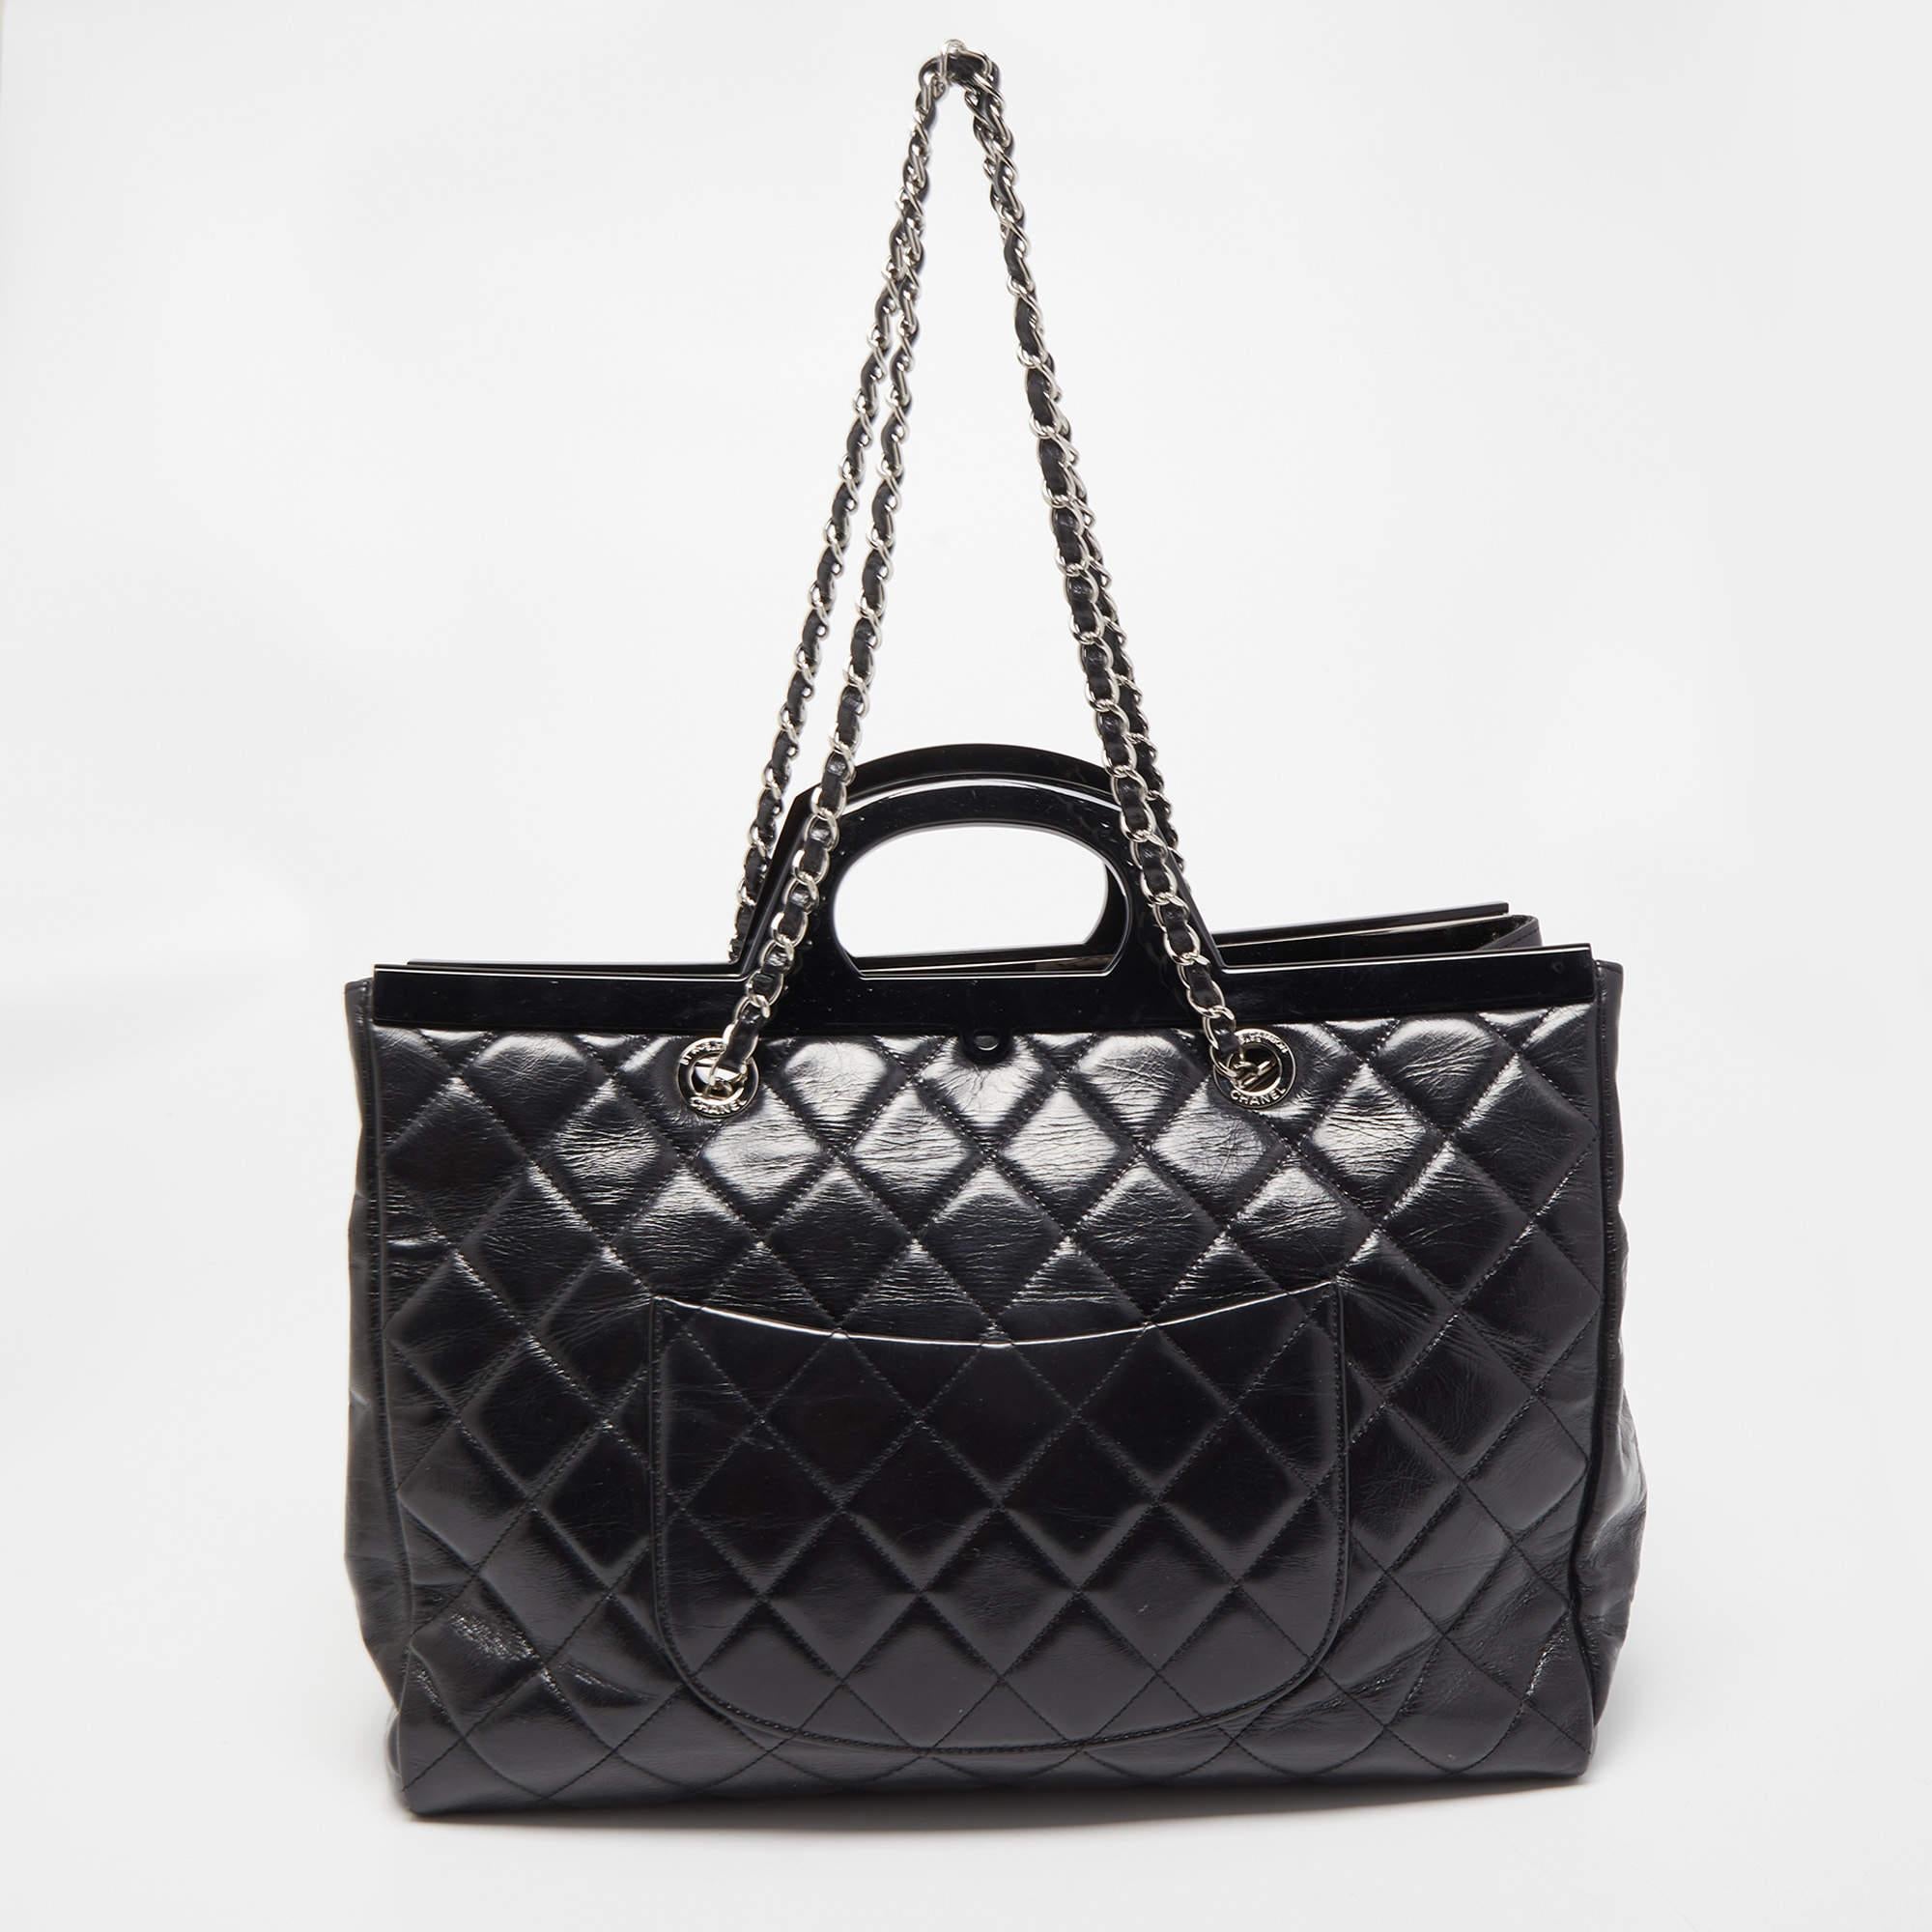 This Chanel CC Delivery tote is a result of blending high crafting skills with a practical design. It arrives with a durable exterior complemented by luxe detailing. It is an accessory that you can count on.

